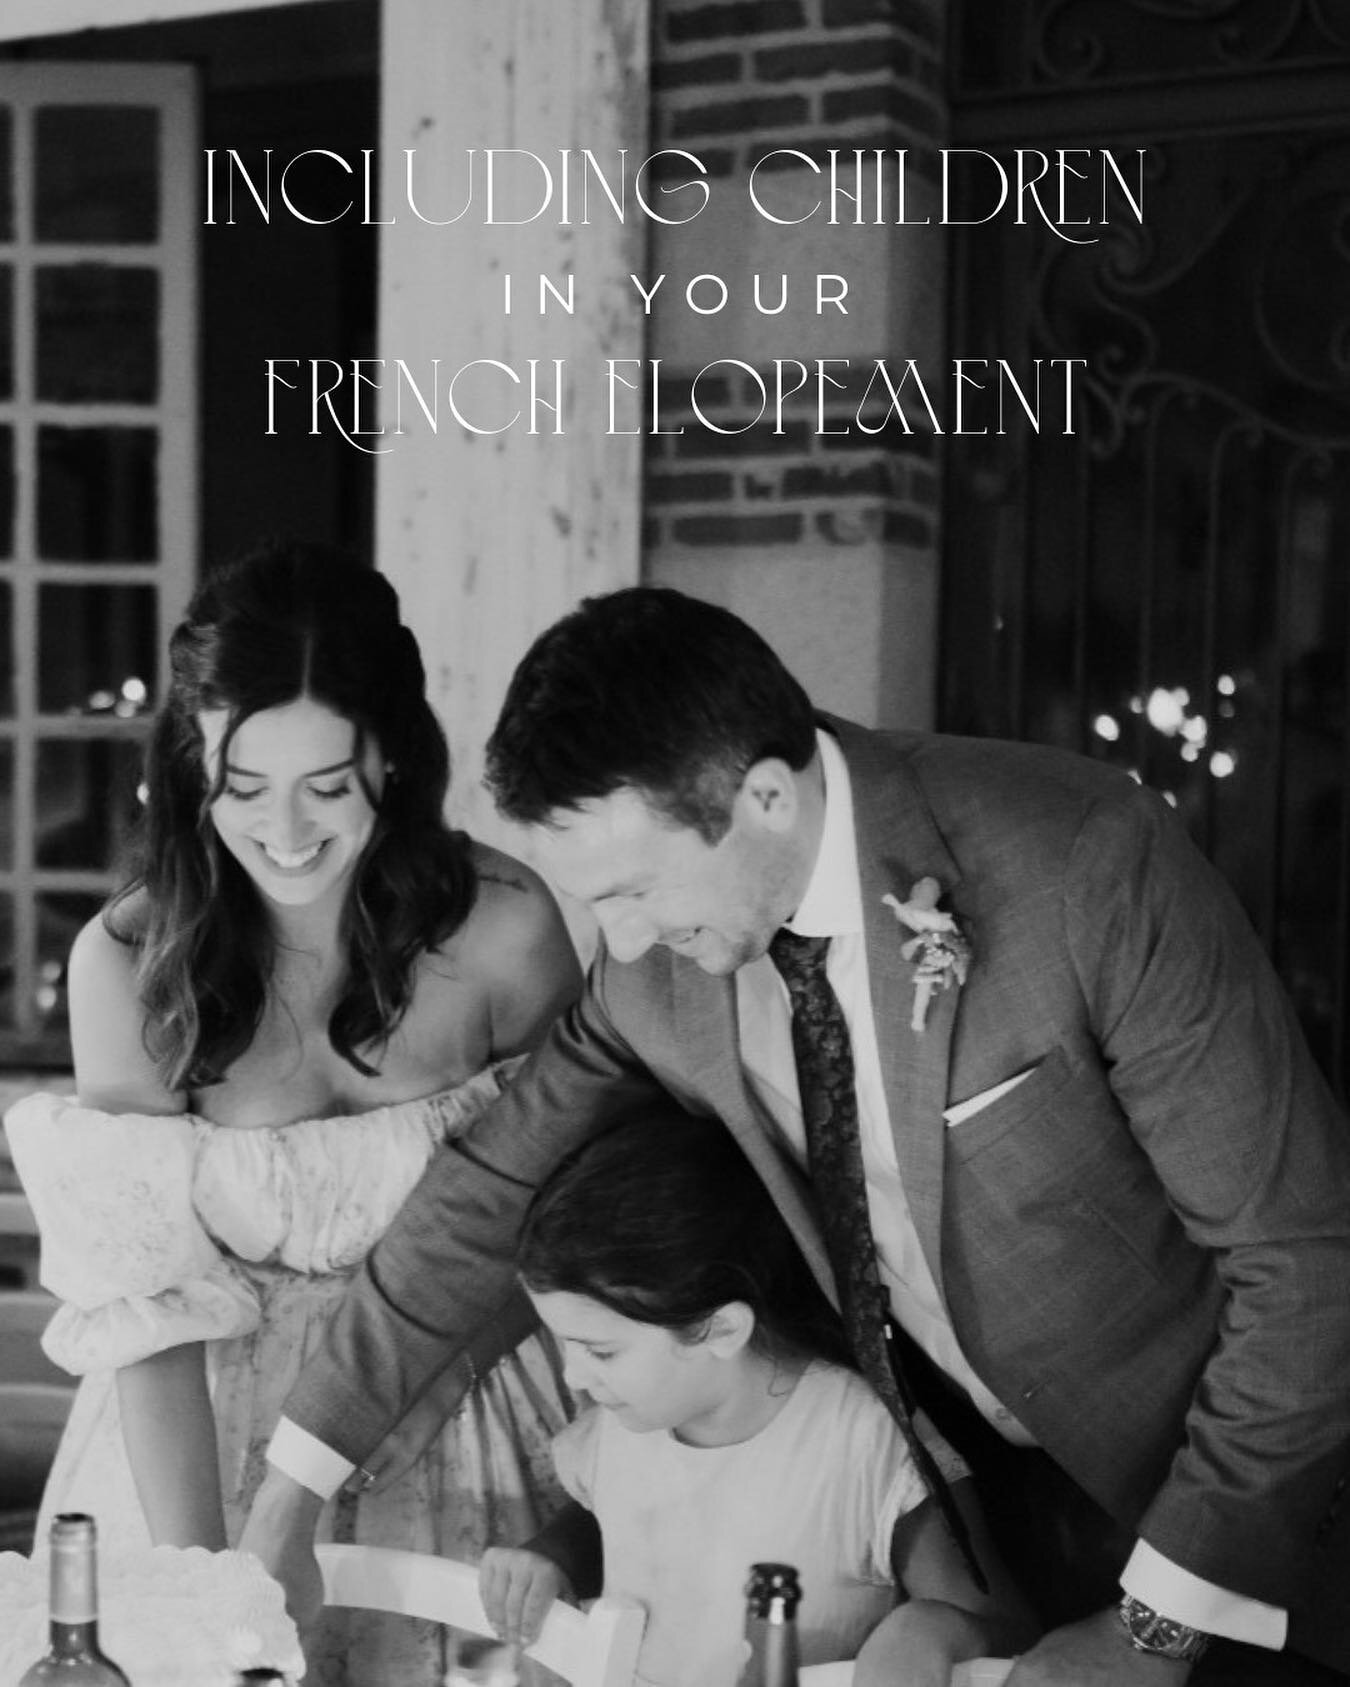 Making Memories: Including Children in Your French Elopement 💖✨ We've put together a heartfelt guide in our latest blog post on how to seamlessly incorporate children into your elopement in France. Explore our tips and ideas for crafting an intimate